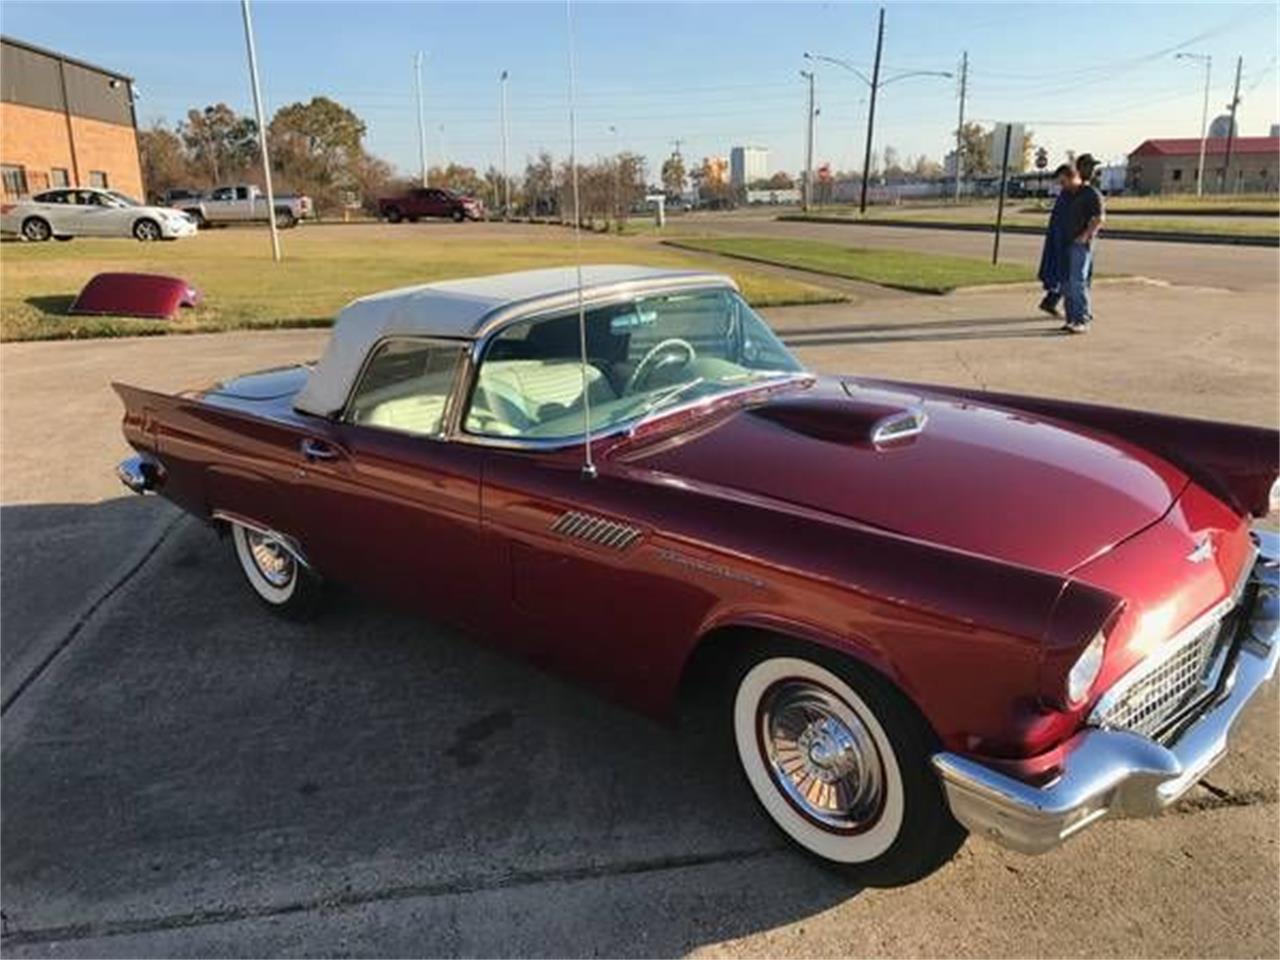 1957 Ford Thunderbird for sale in Cadillac, MI